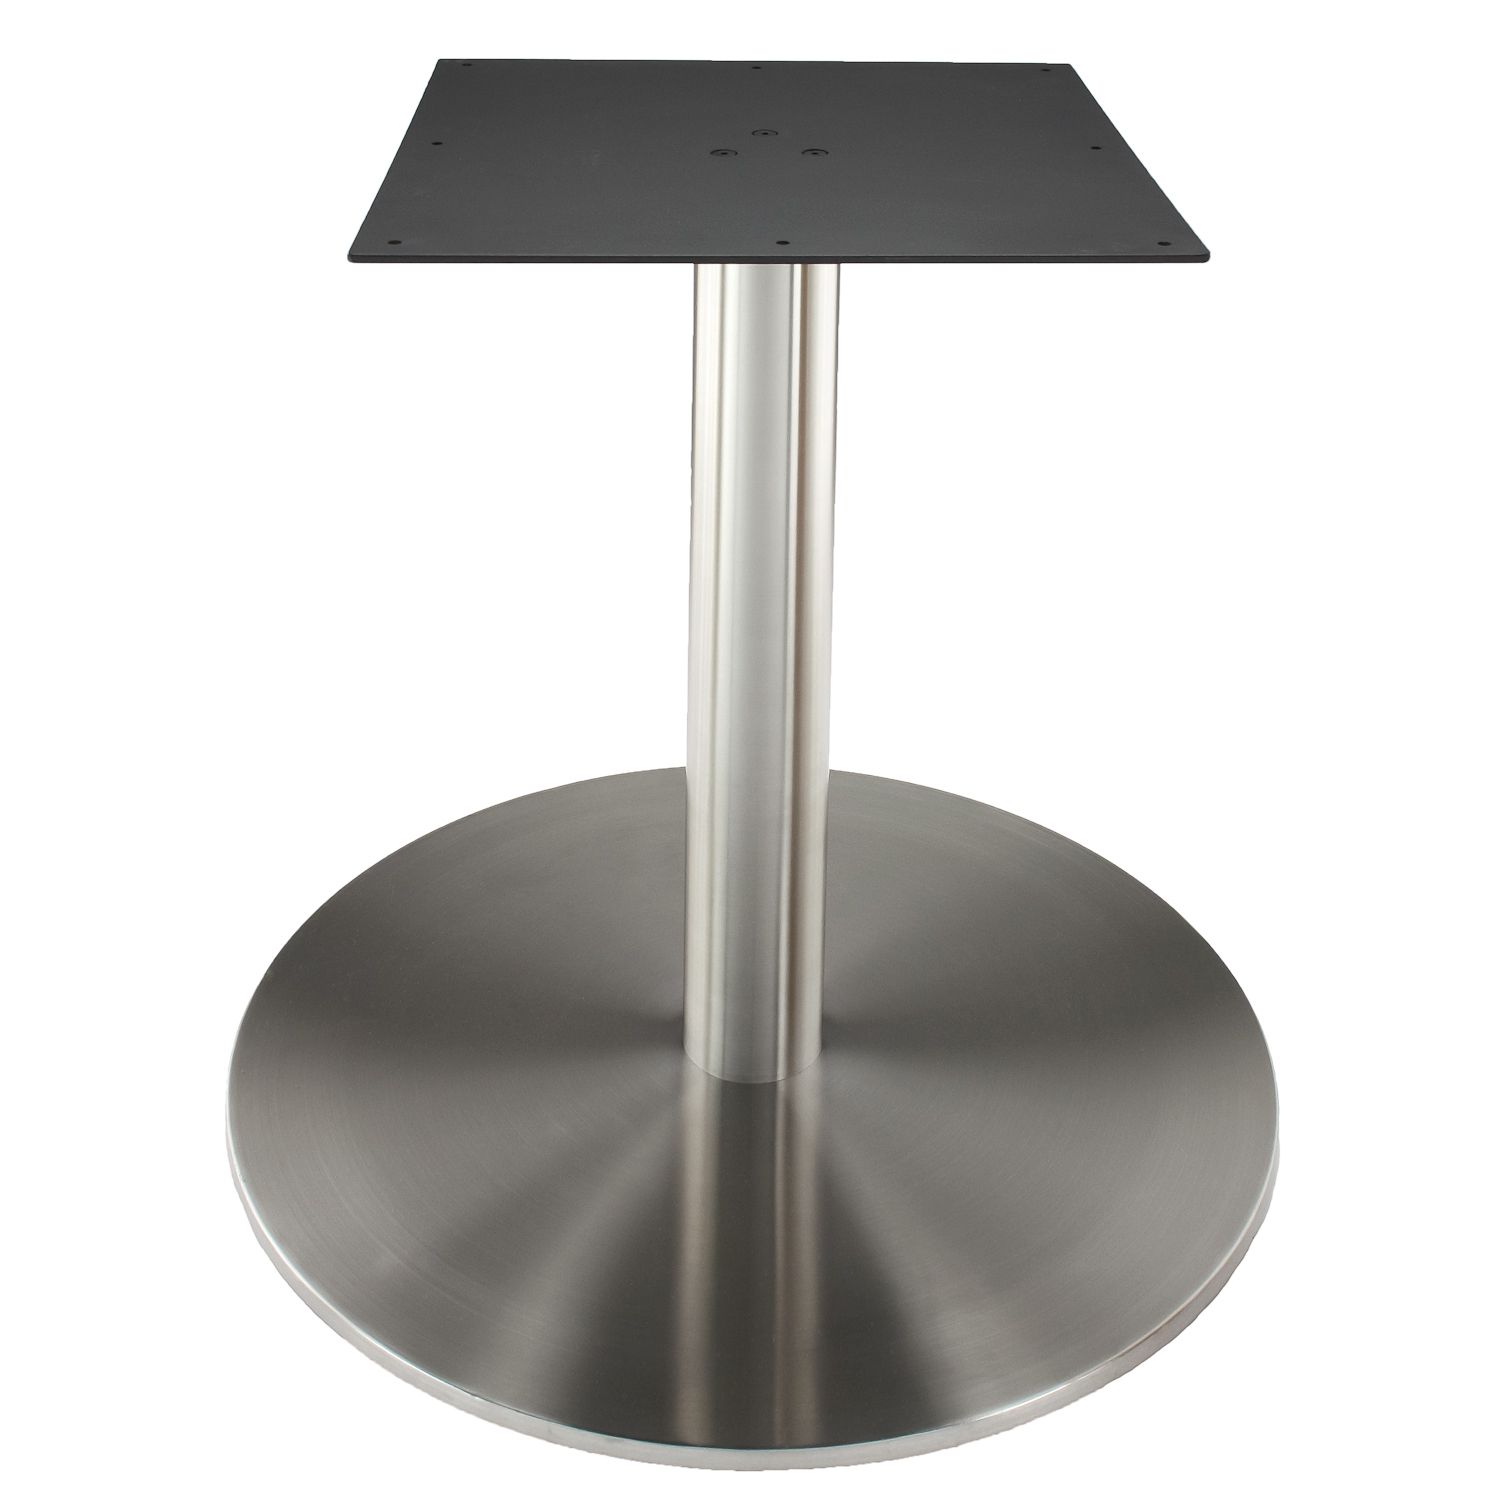 RFL750 - Stainless Steel Table Base